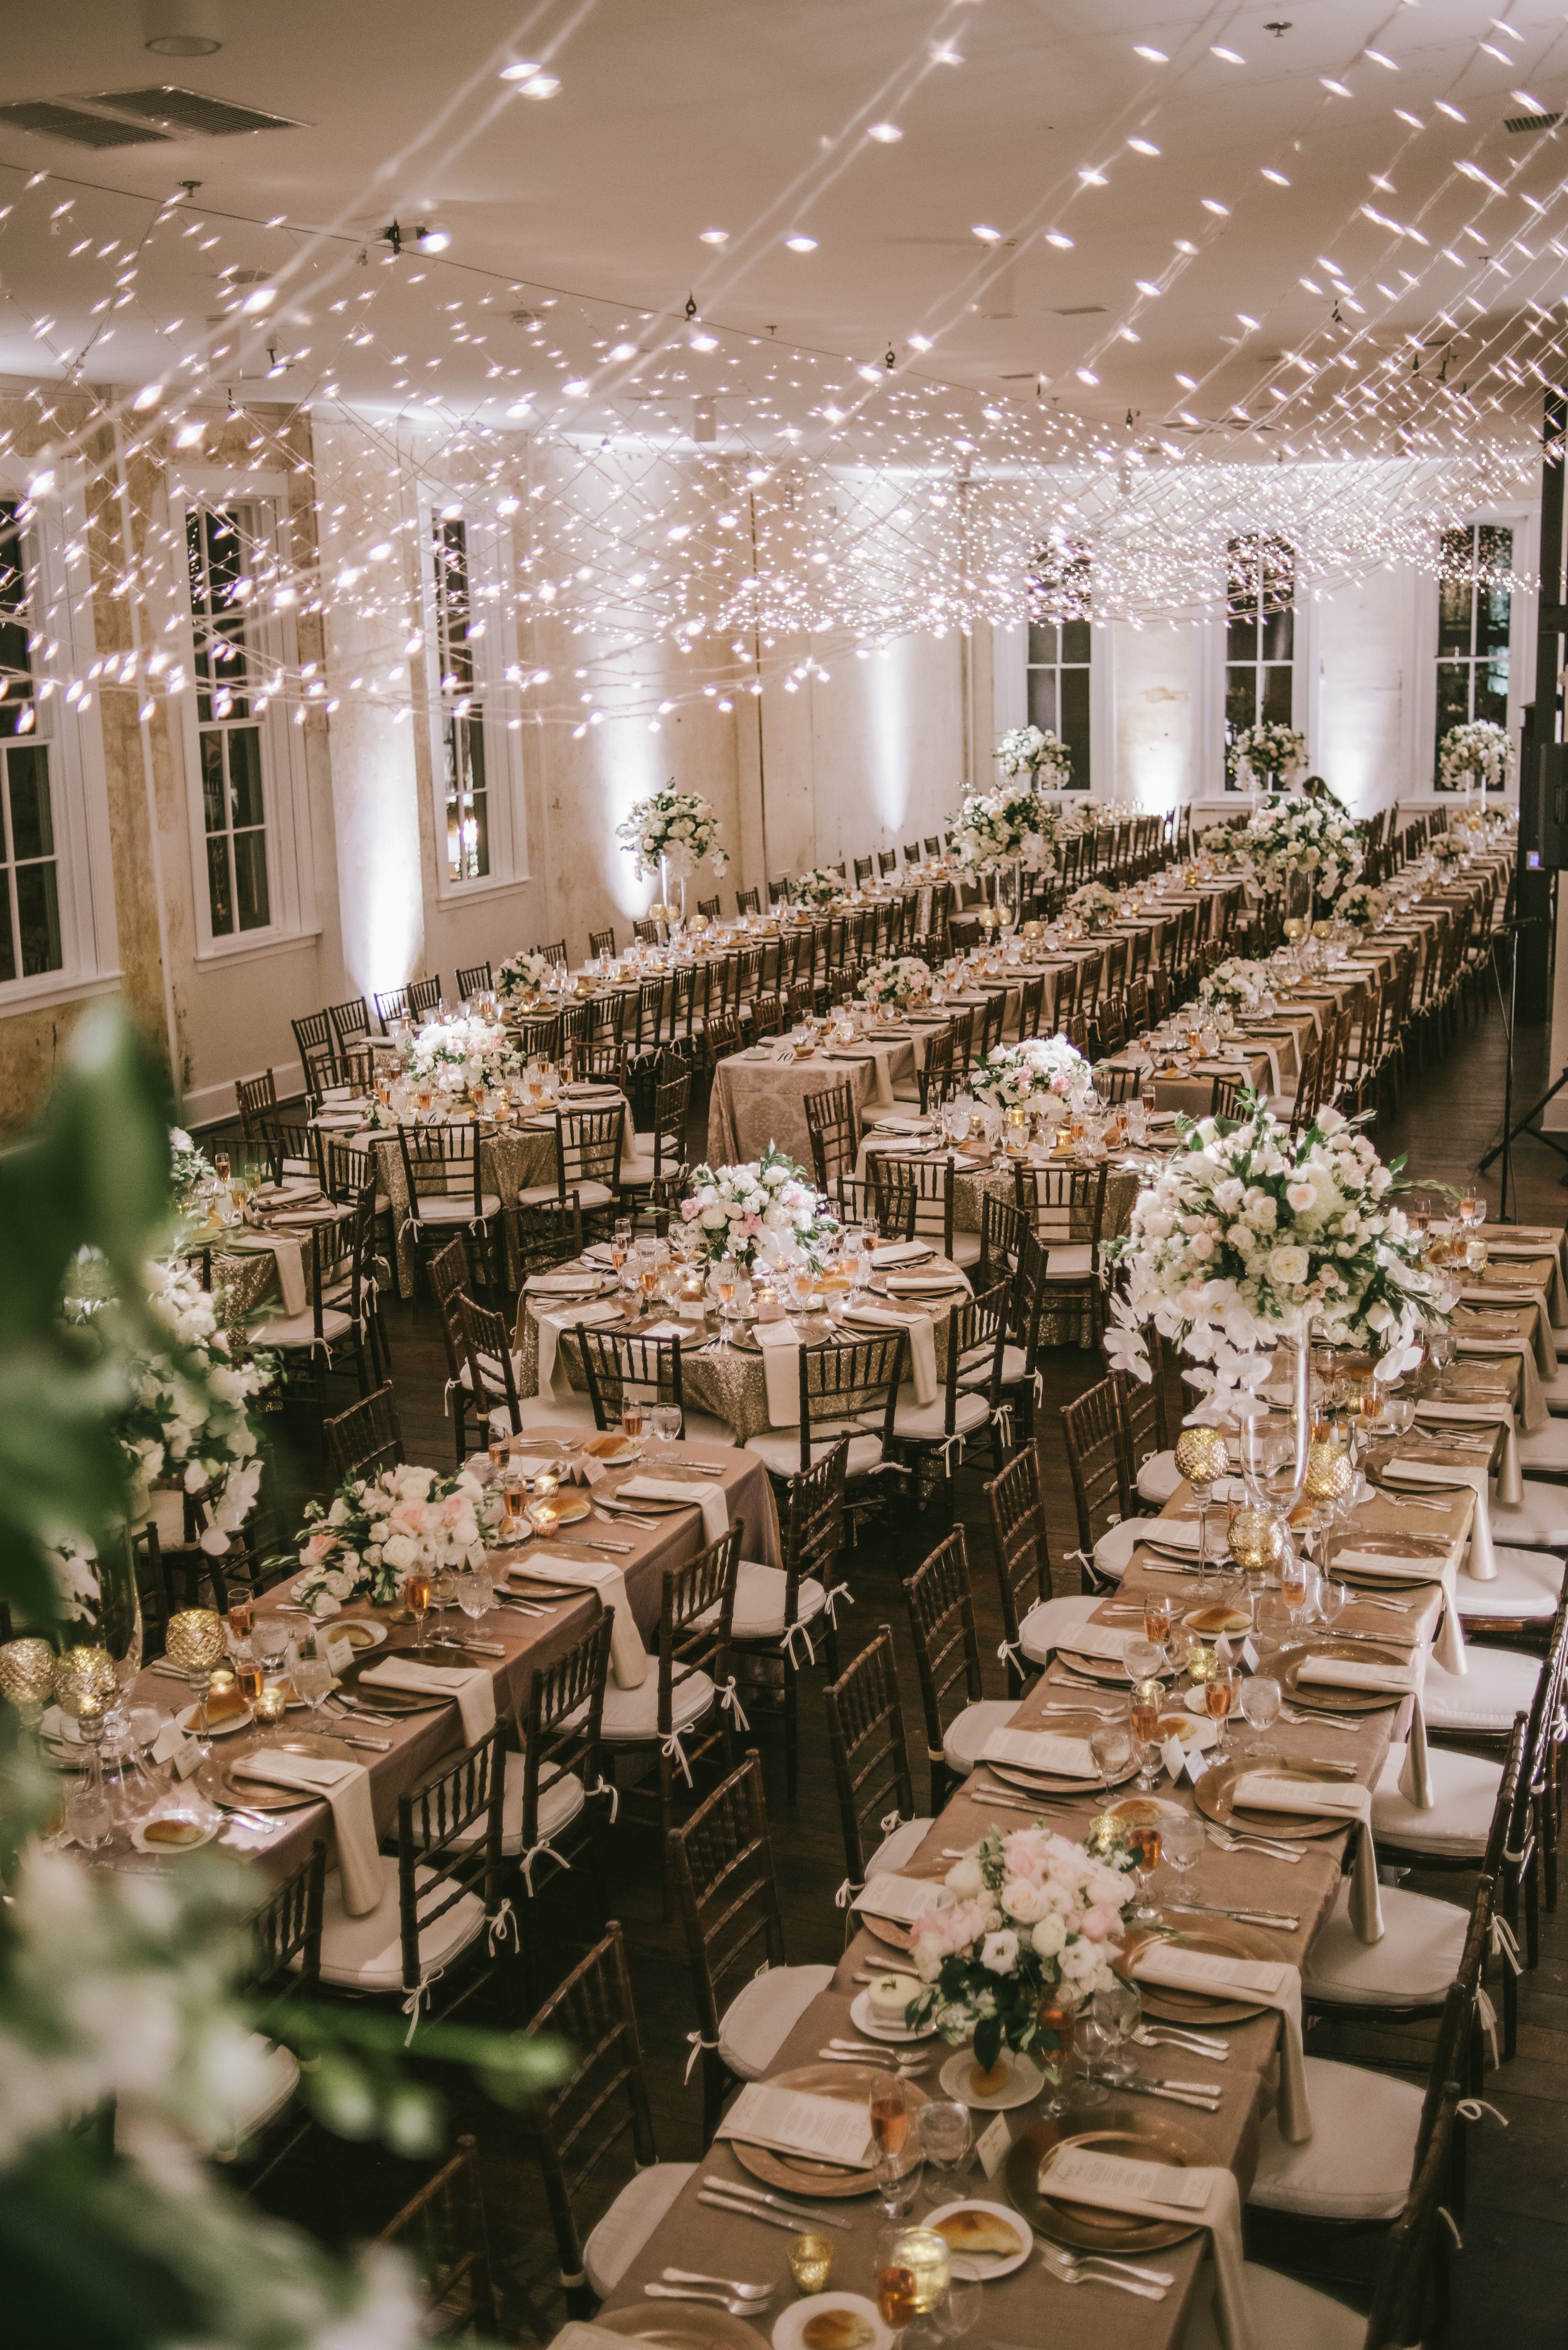 Wedding reception dinner tables with greenery and hanging lights